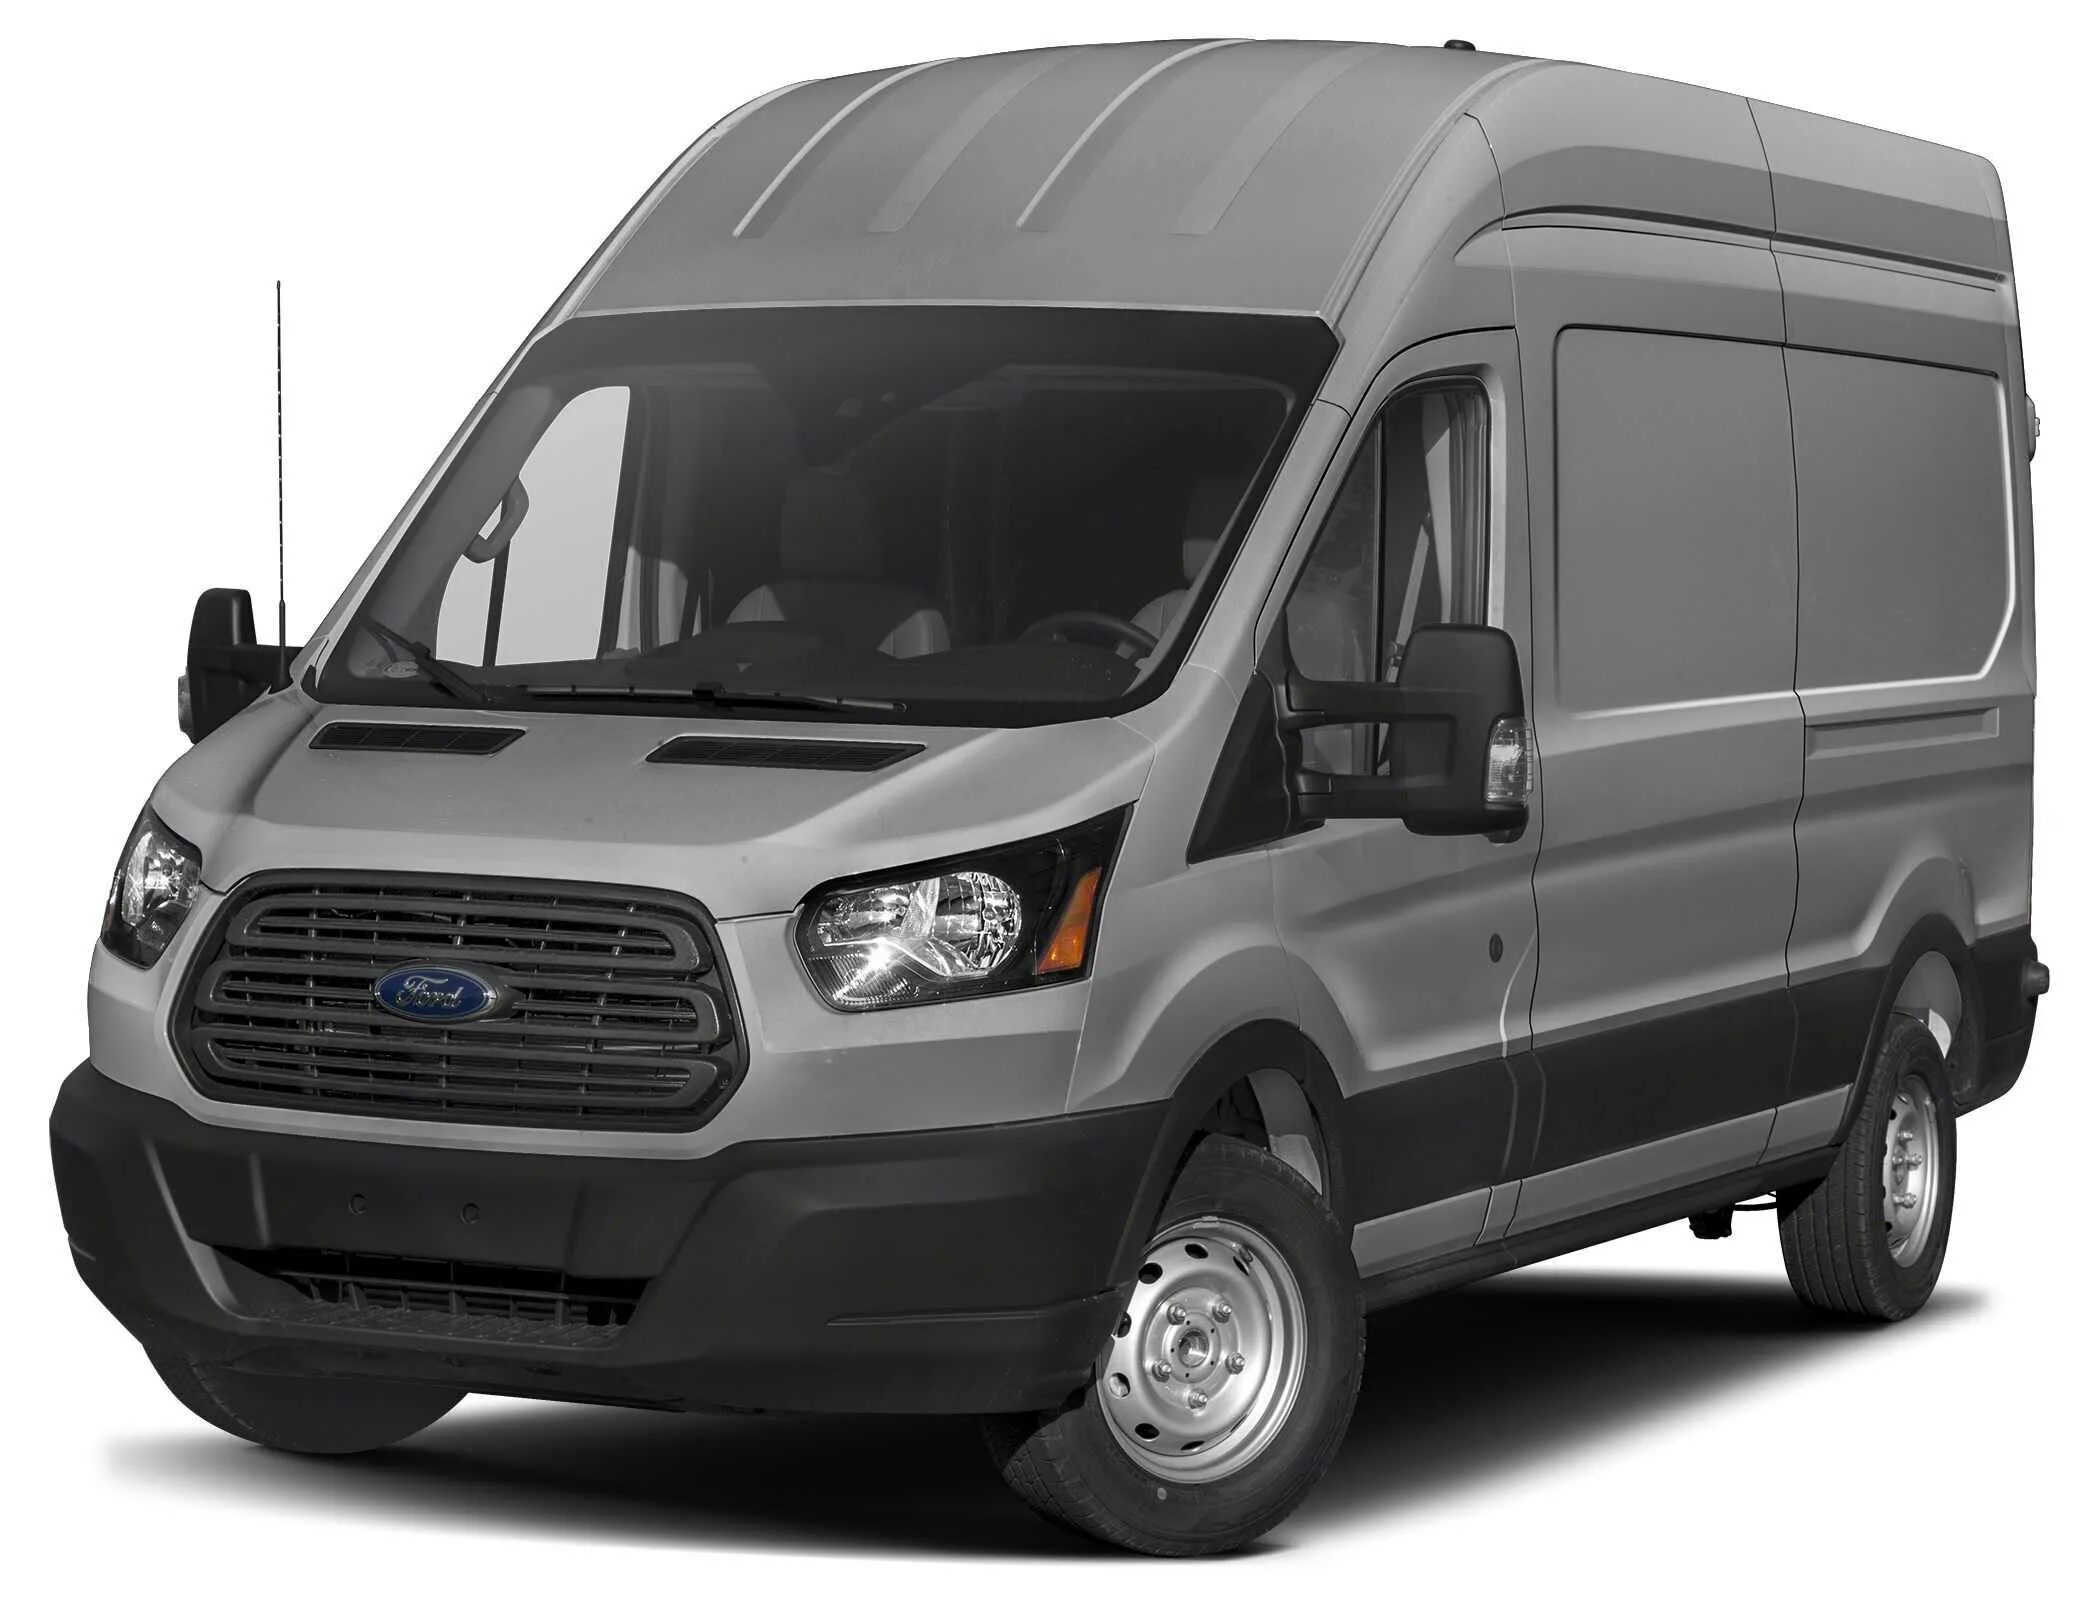 Форд транзит 20. Ford Transit 2016. Ford Transit 2019. Форд Транзит 2016. Ford Transit 2009.